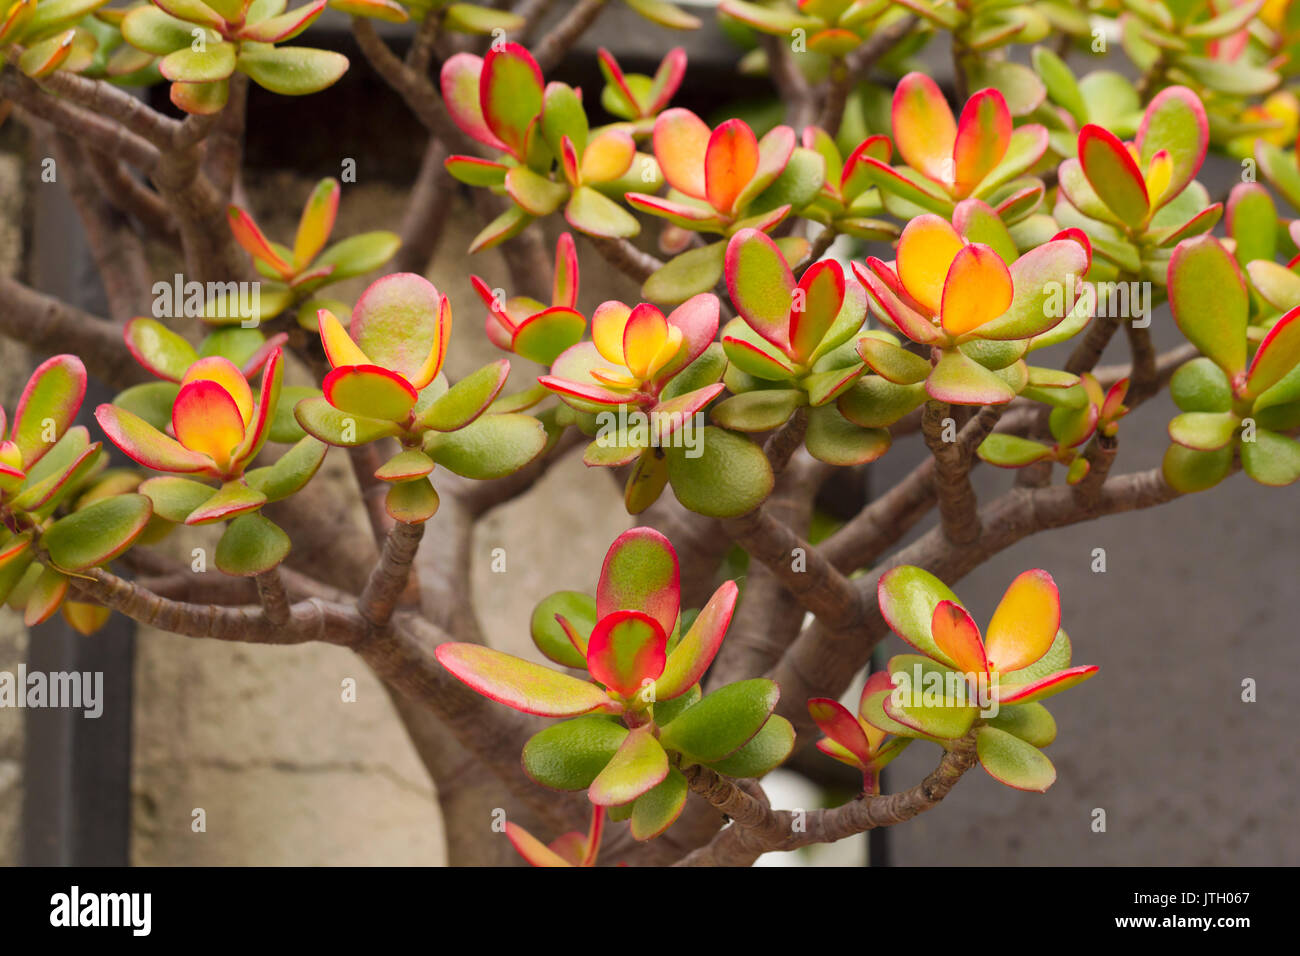 Crassula ovata, commonly known as jade plant, friendship tree, lucky plant, or money tree, is a succulent plant with small pink or white flowers. It i Stock Photo